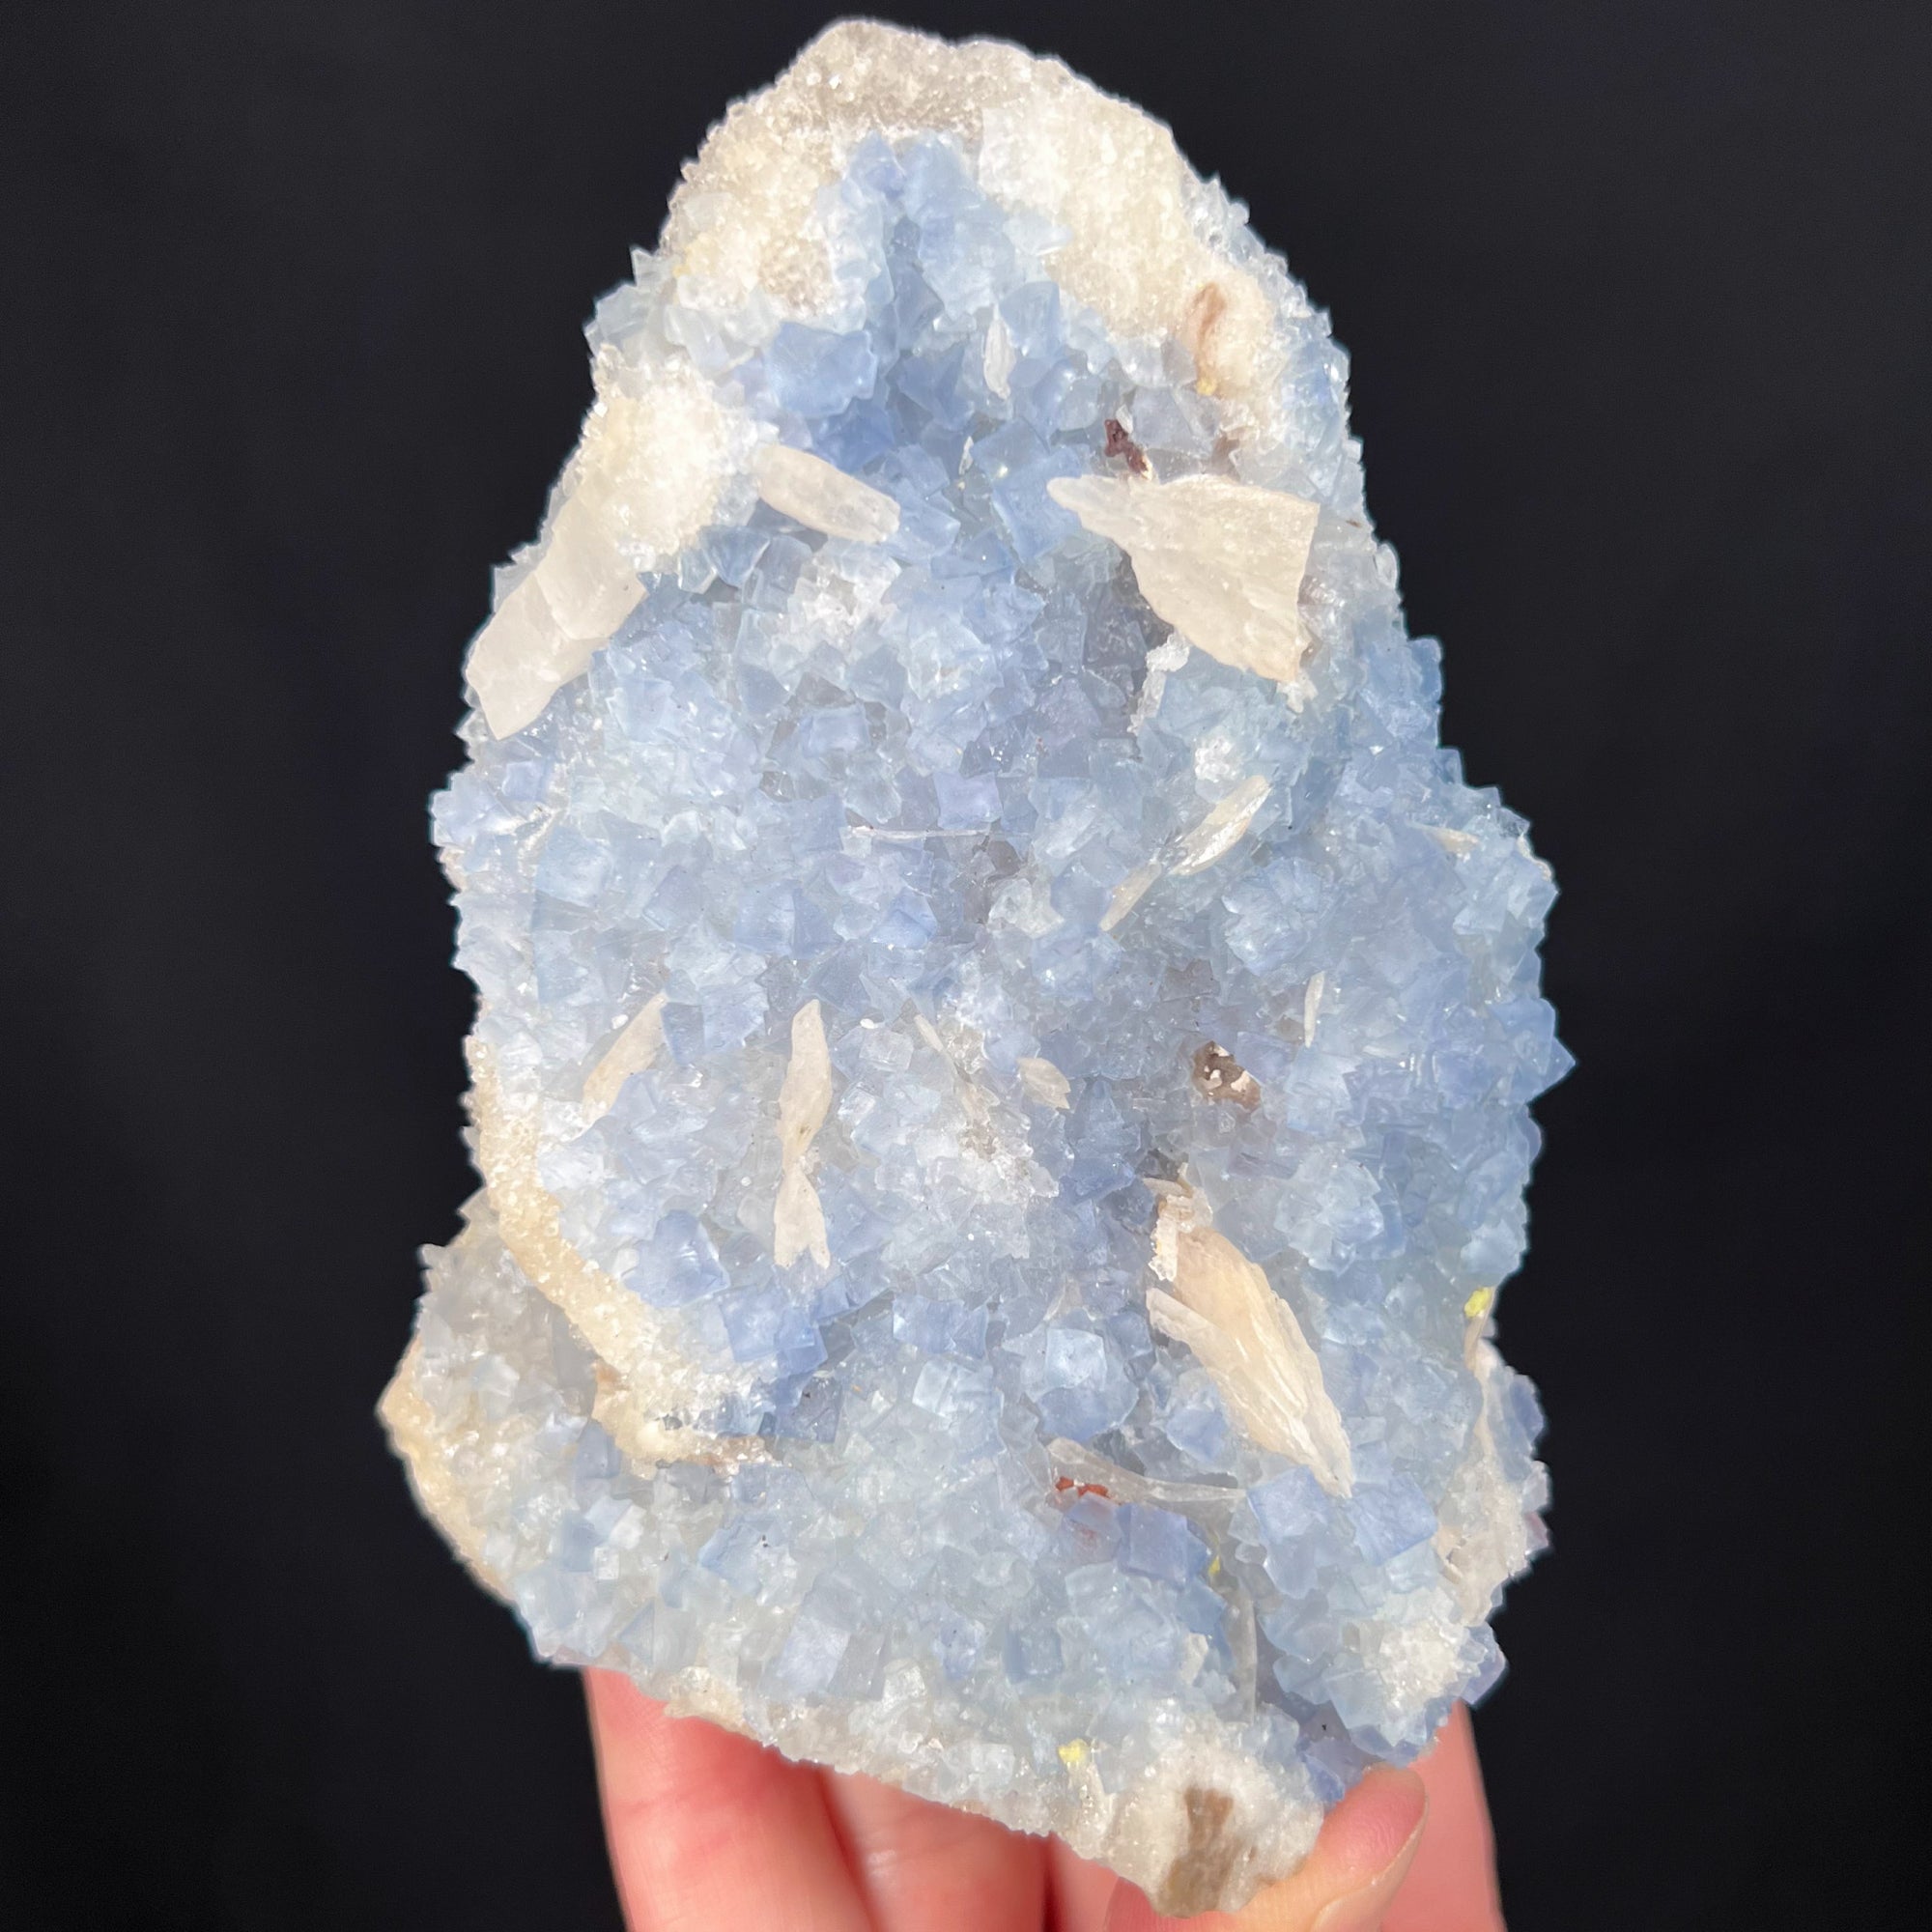 Blue Fluorite Crystal Cubes with White Barite Crystals from New Mexico